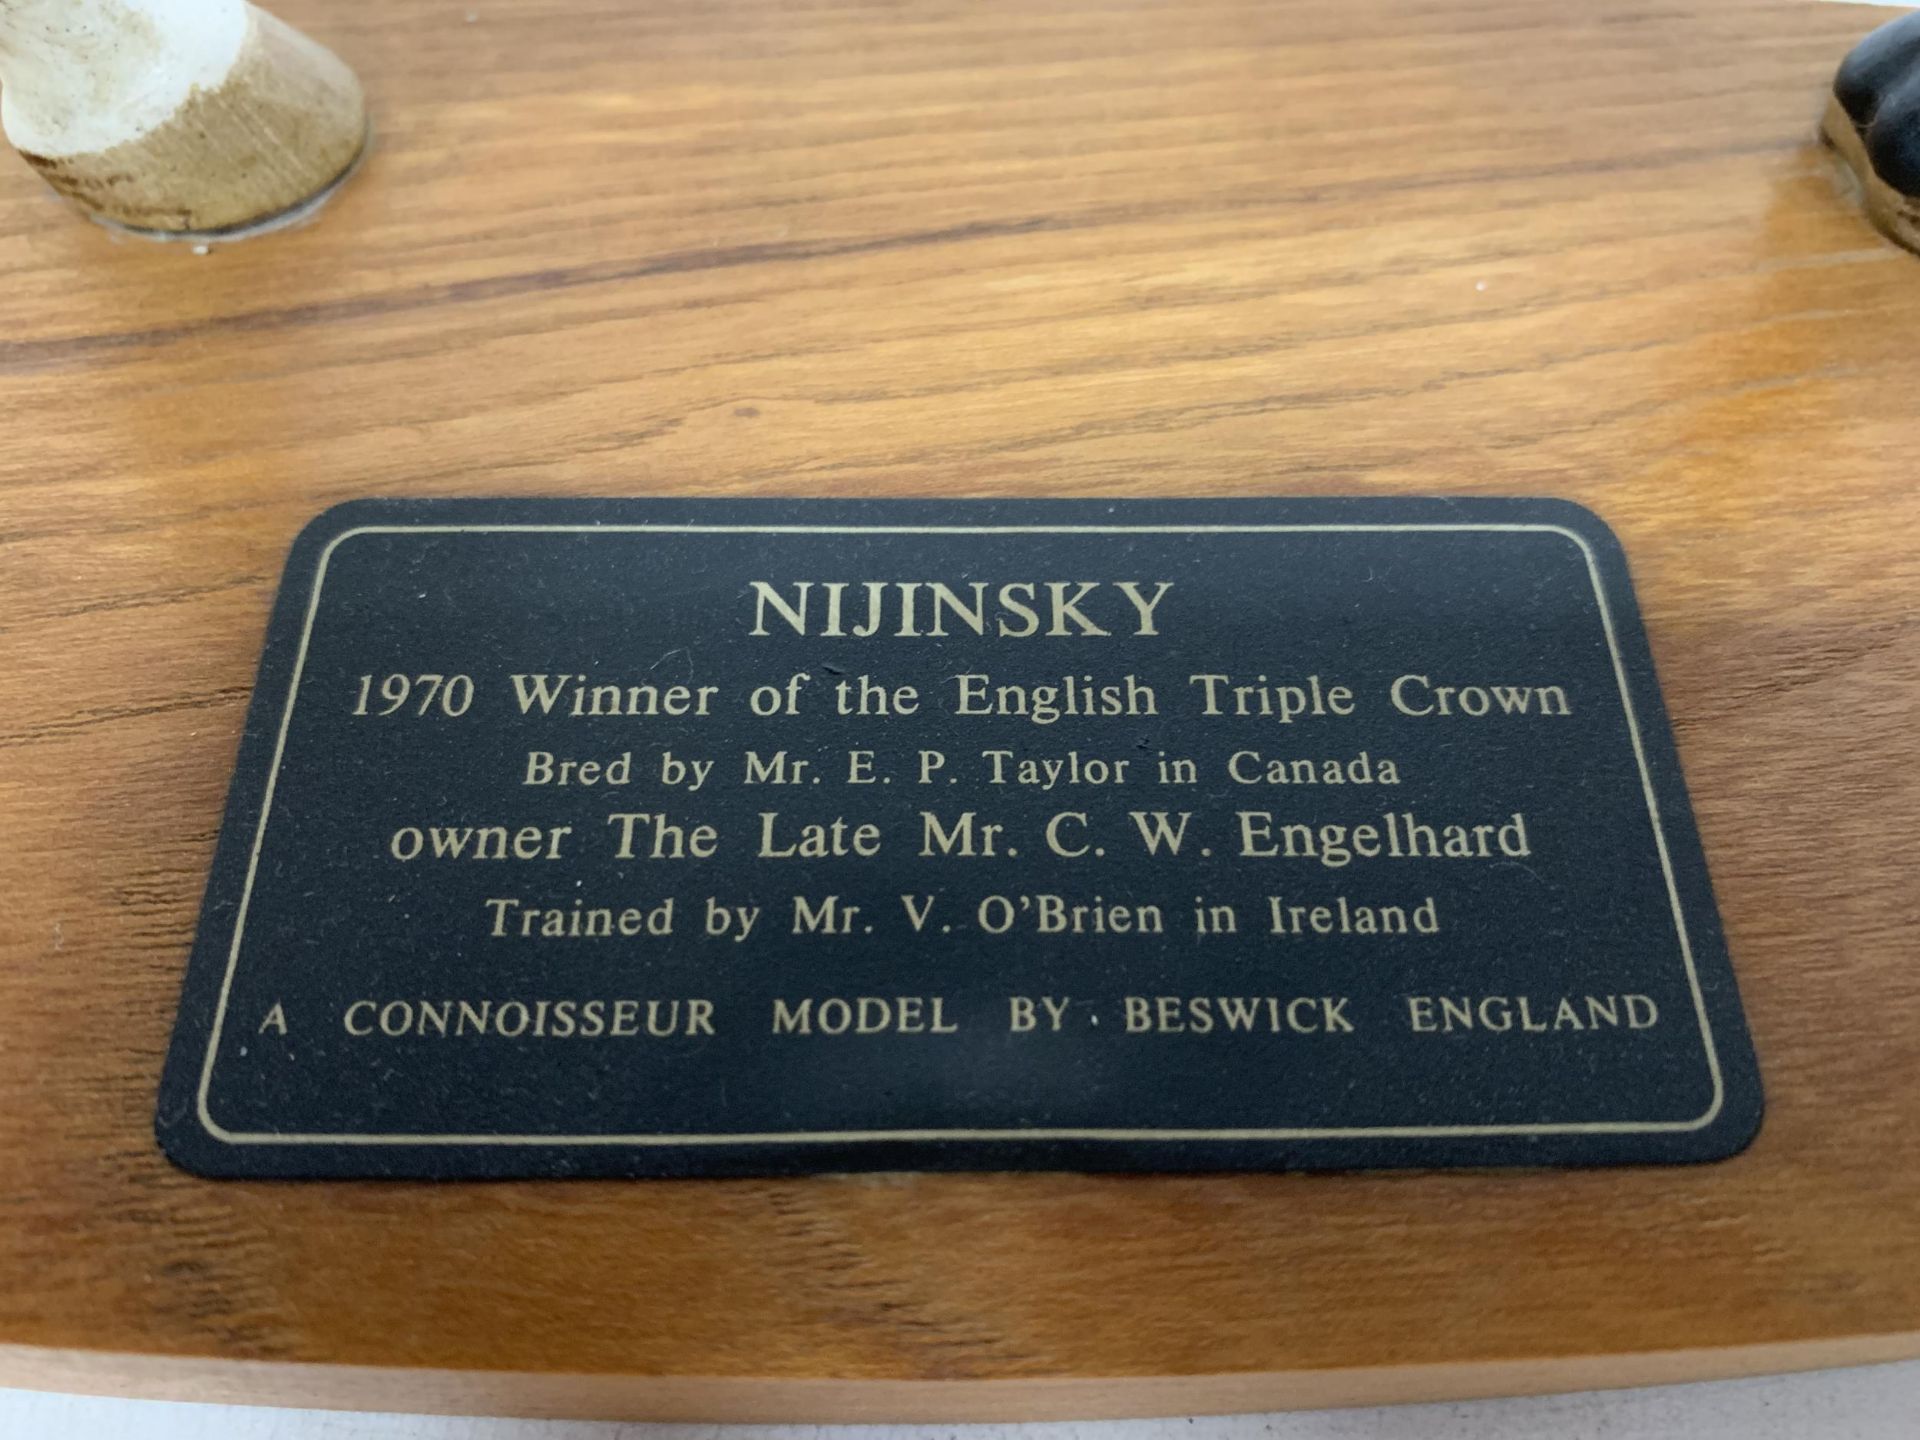 A BESWICK "NIJINSKY" HORSE FIGURINE FROM THE CONNOISSEUR HORSES SERIES WINNER OF THE TRIPLE CROWN - Image 4 of 5